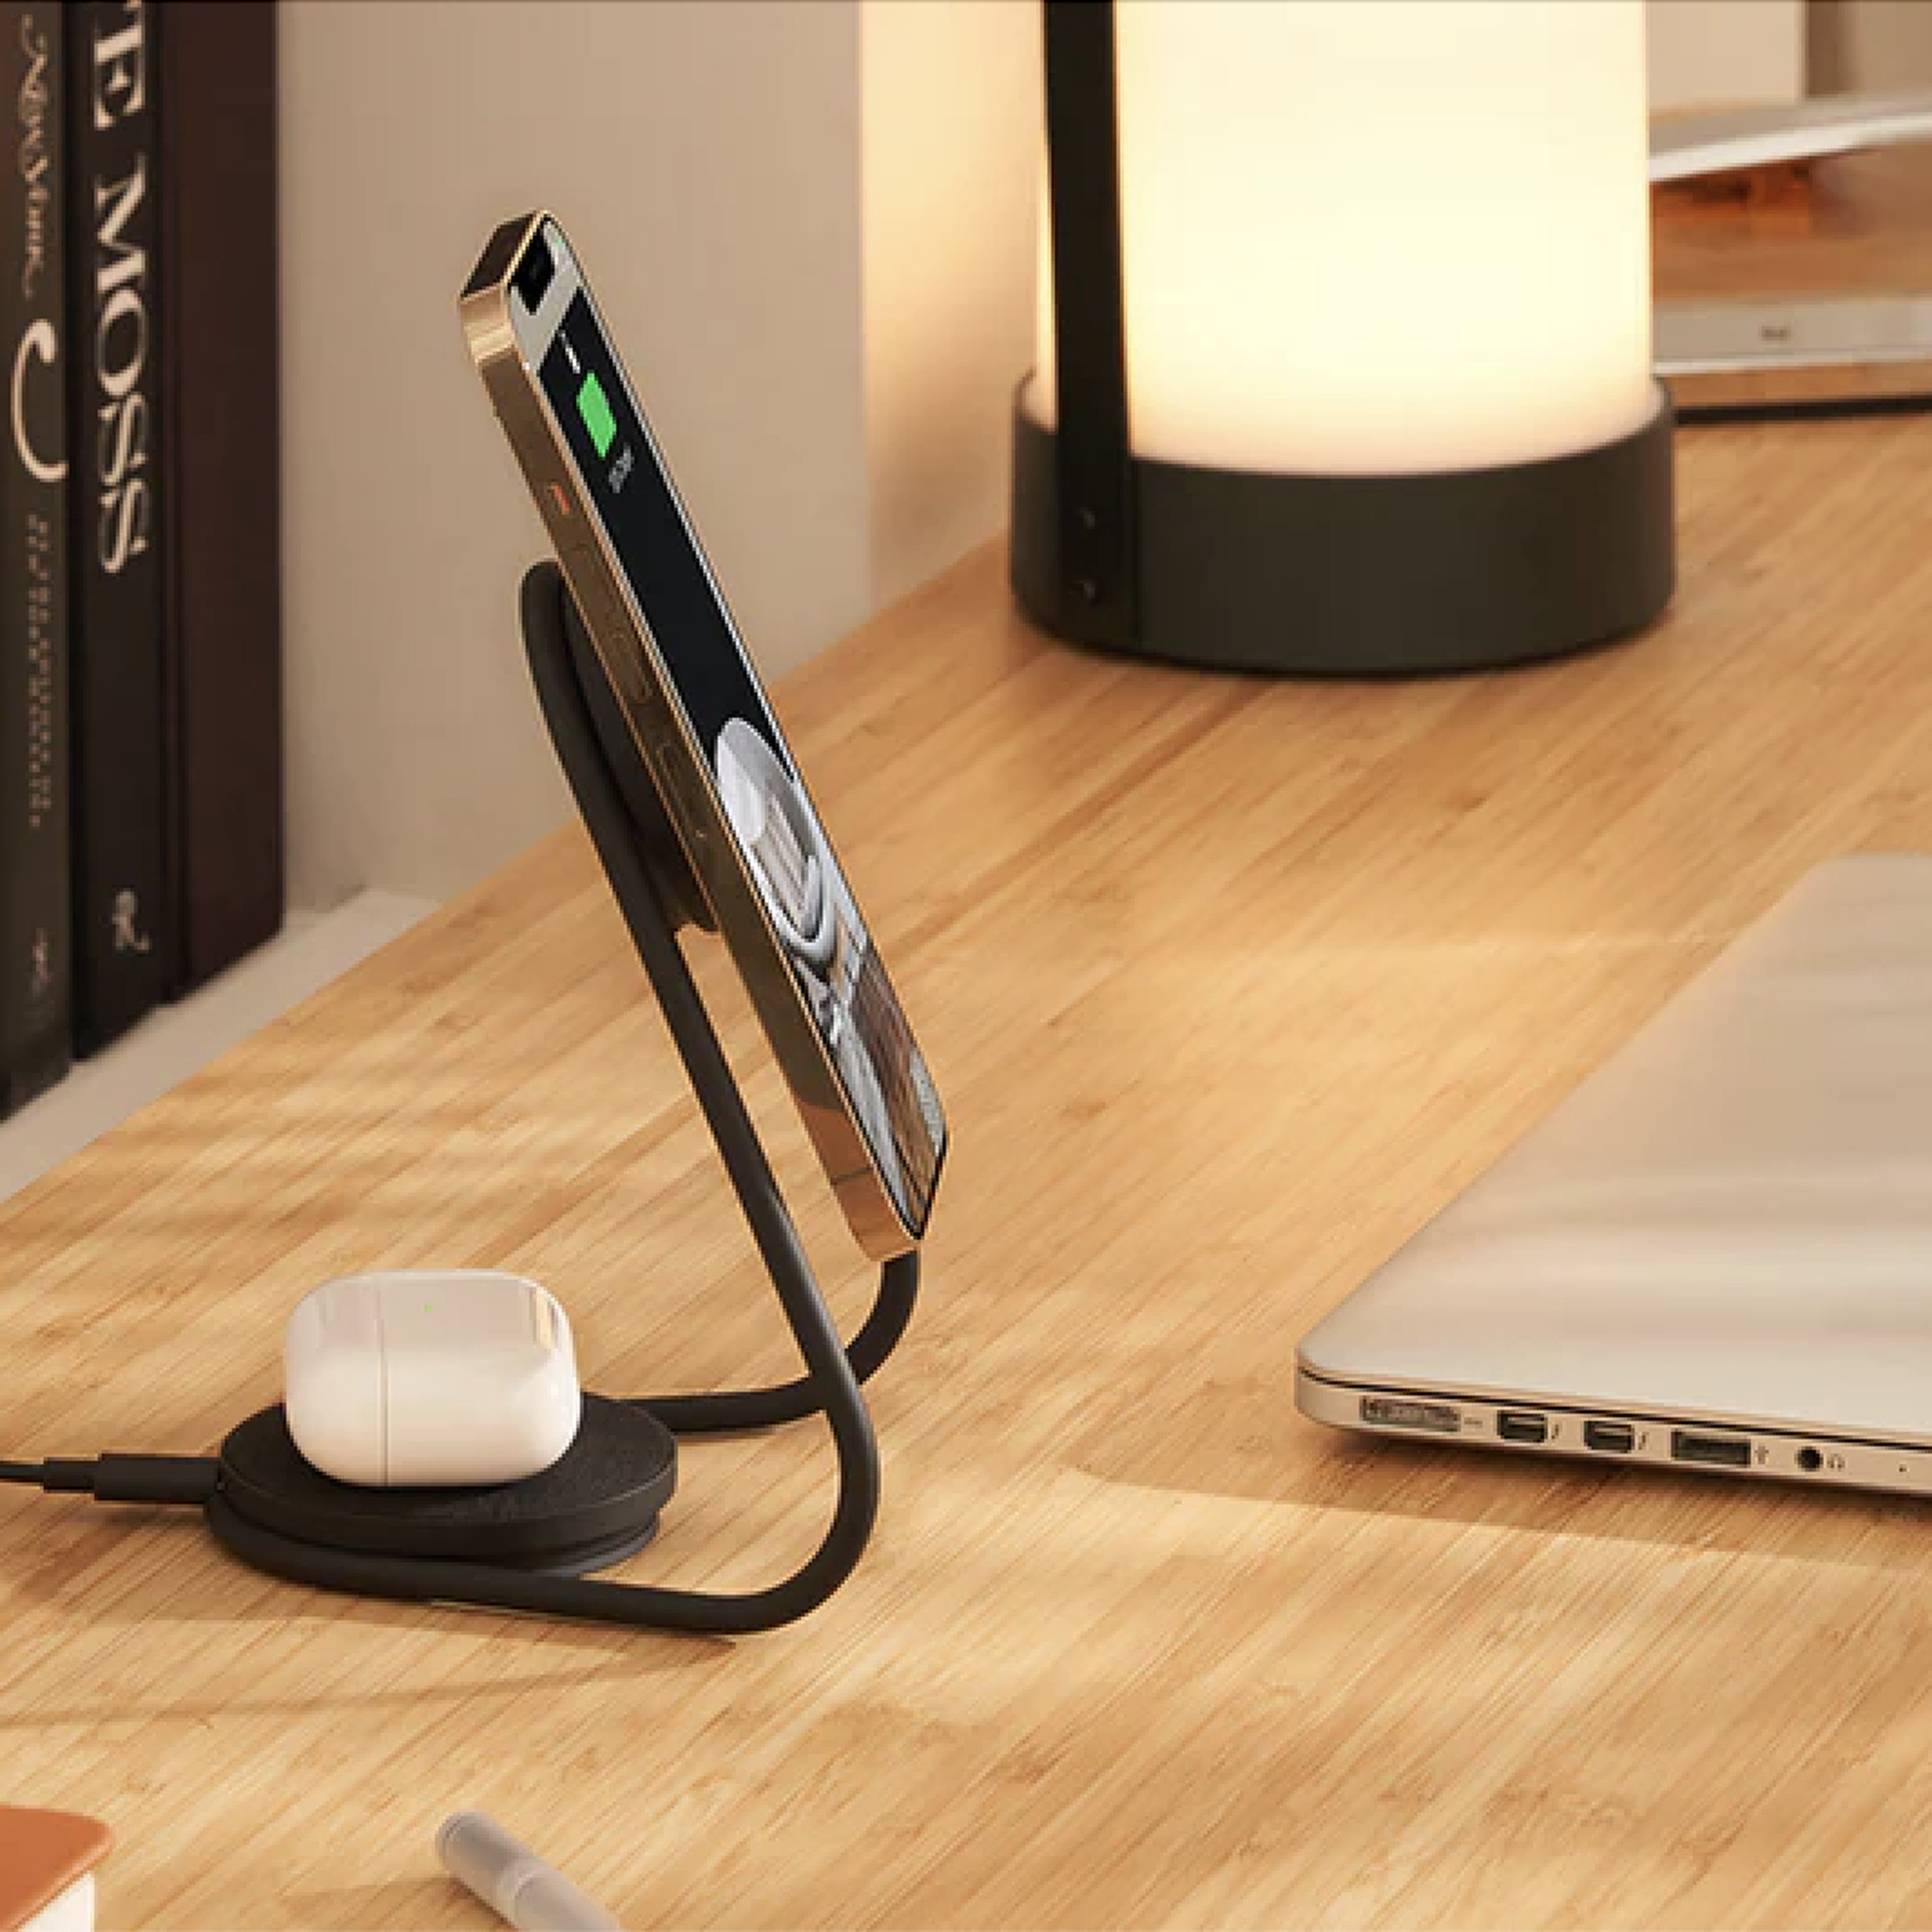 Metallic stand on a desk holding an iphone and, in back, an AirPods case.